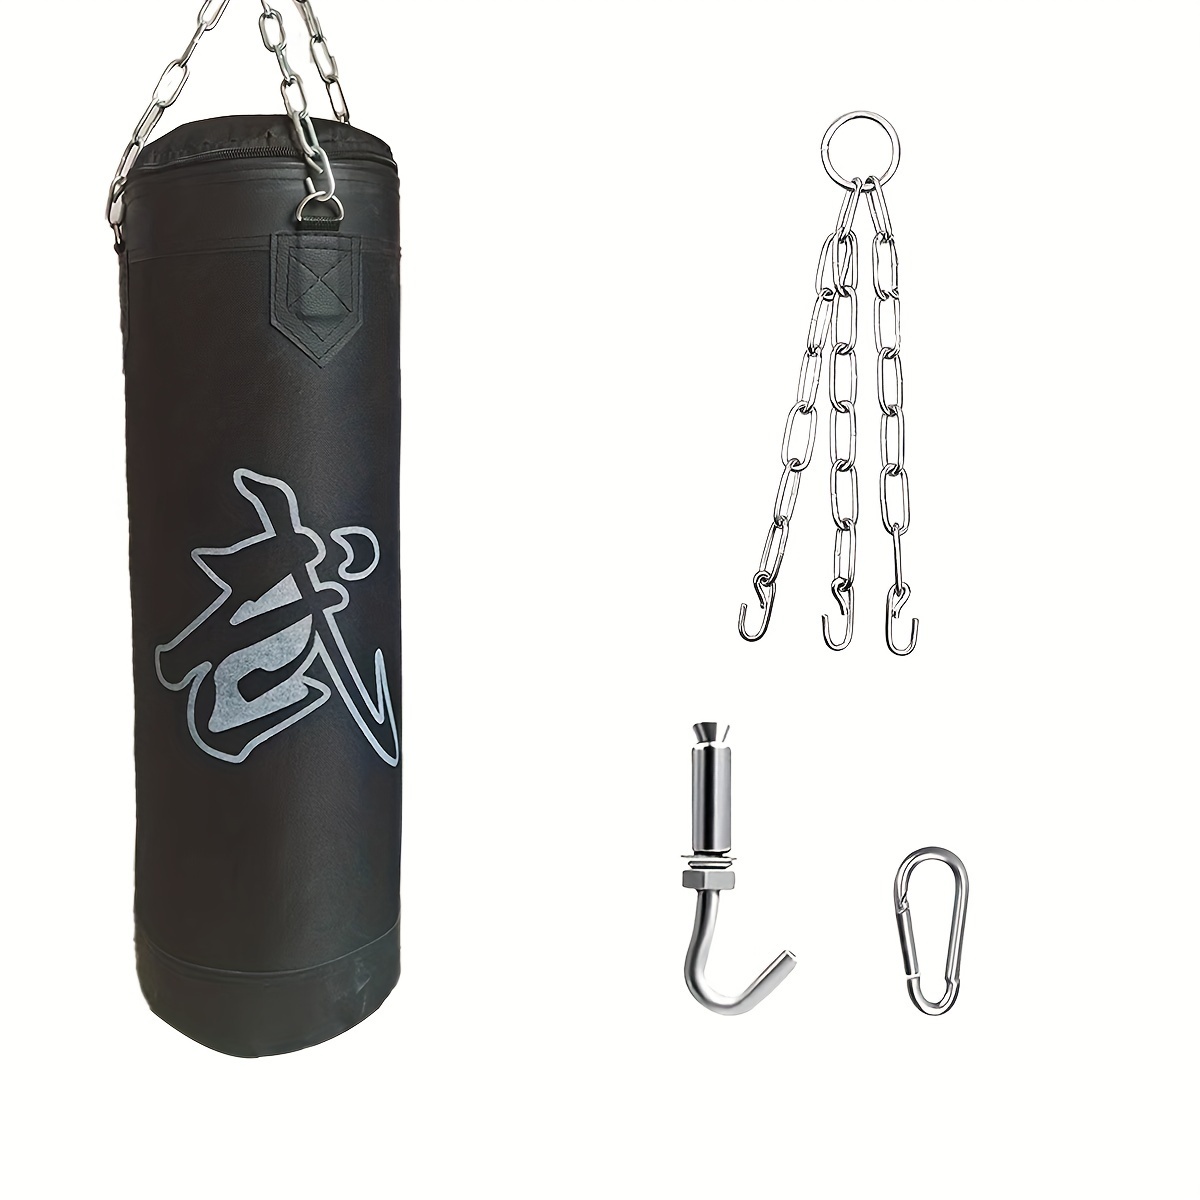 

1 Set 60cm Hanging Boxing Sandbag, Martial Arts Combat Training Sandbag, Equipped With Hooks And Stainless Steel Chains - Unfilled